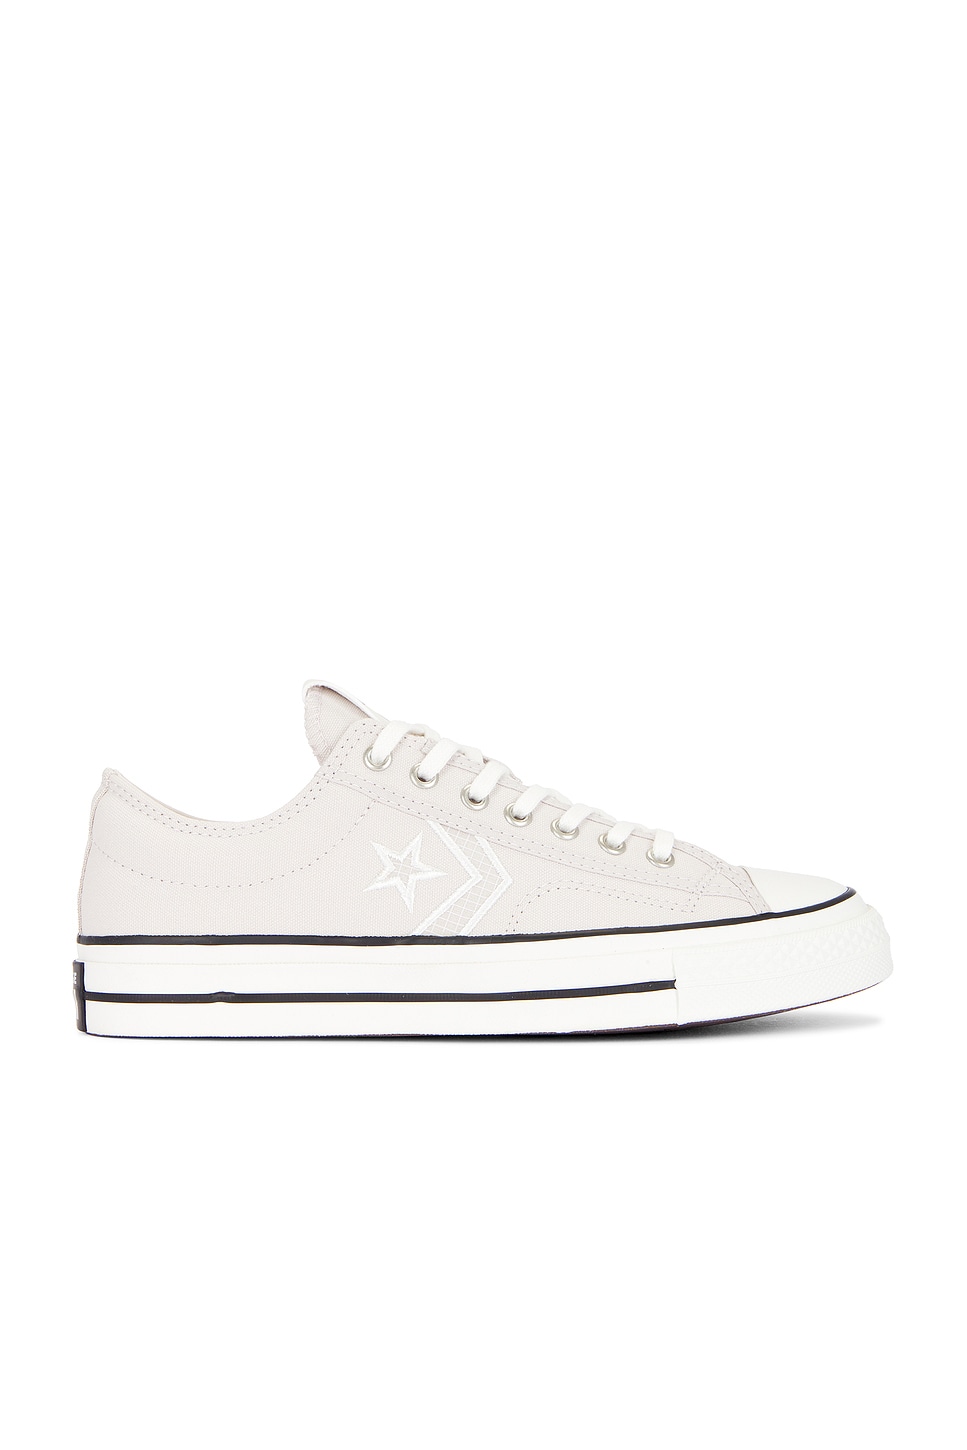 Image 1 of Converse Star Player 76 in Pale Putty, Vintage White, & Black